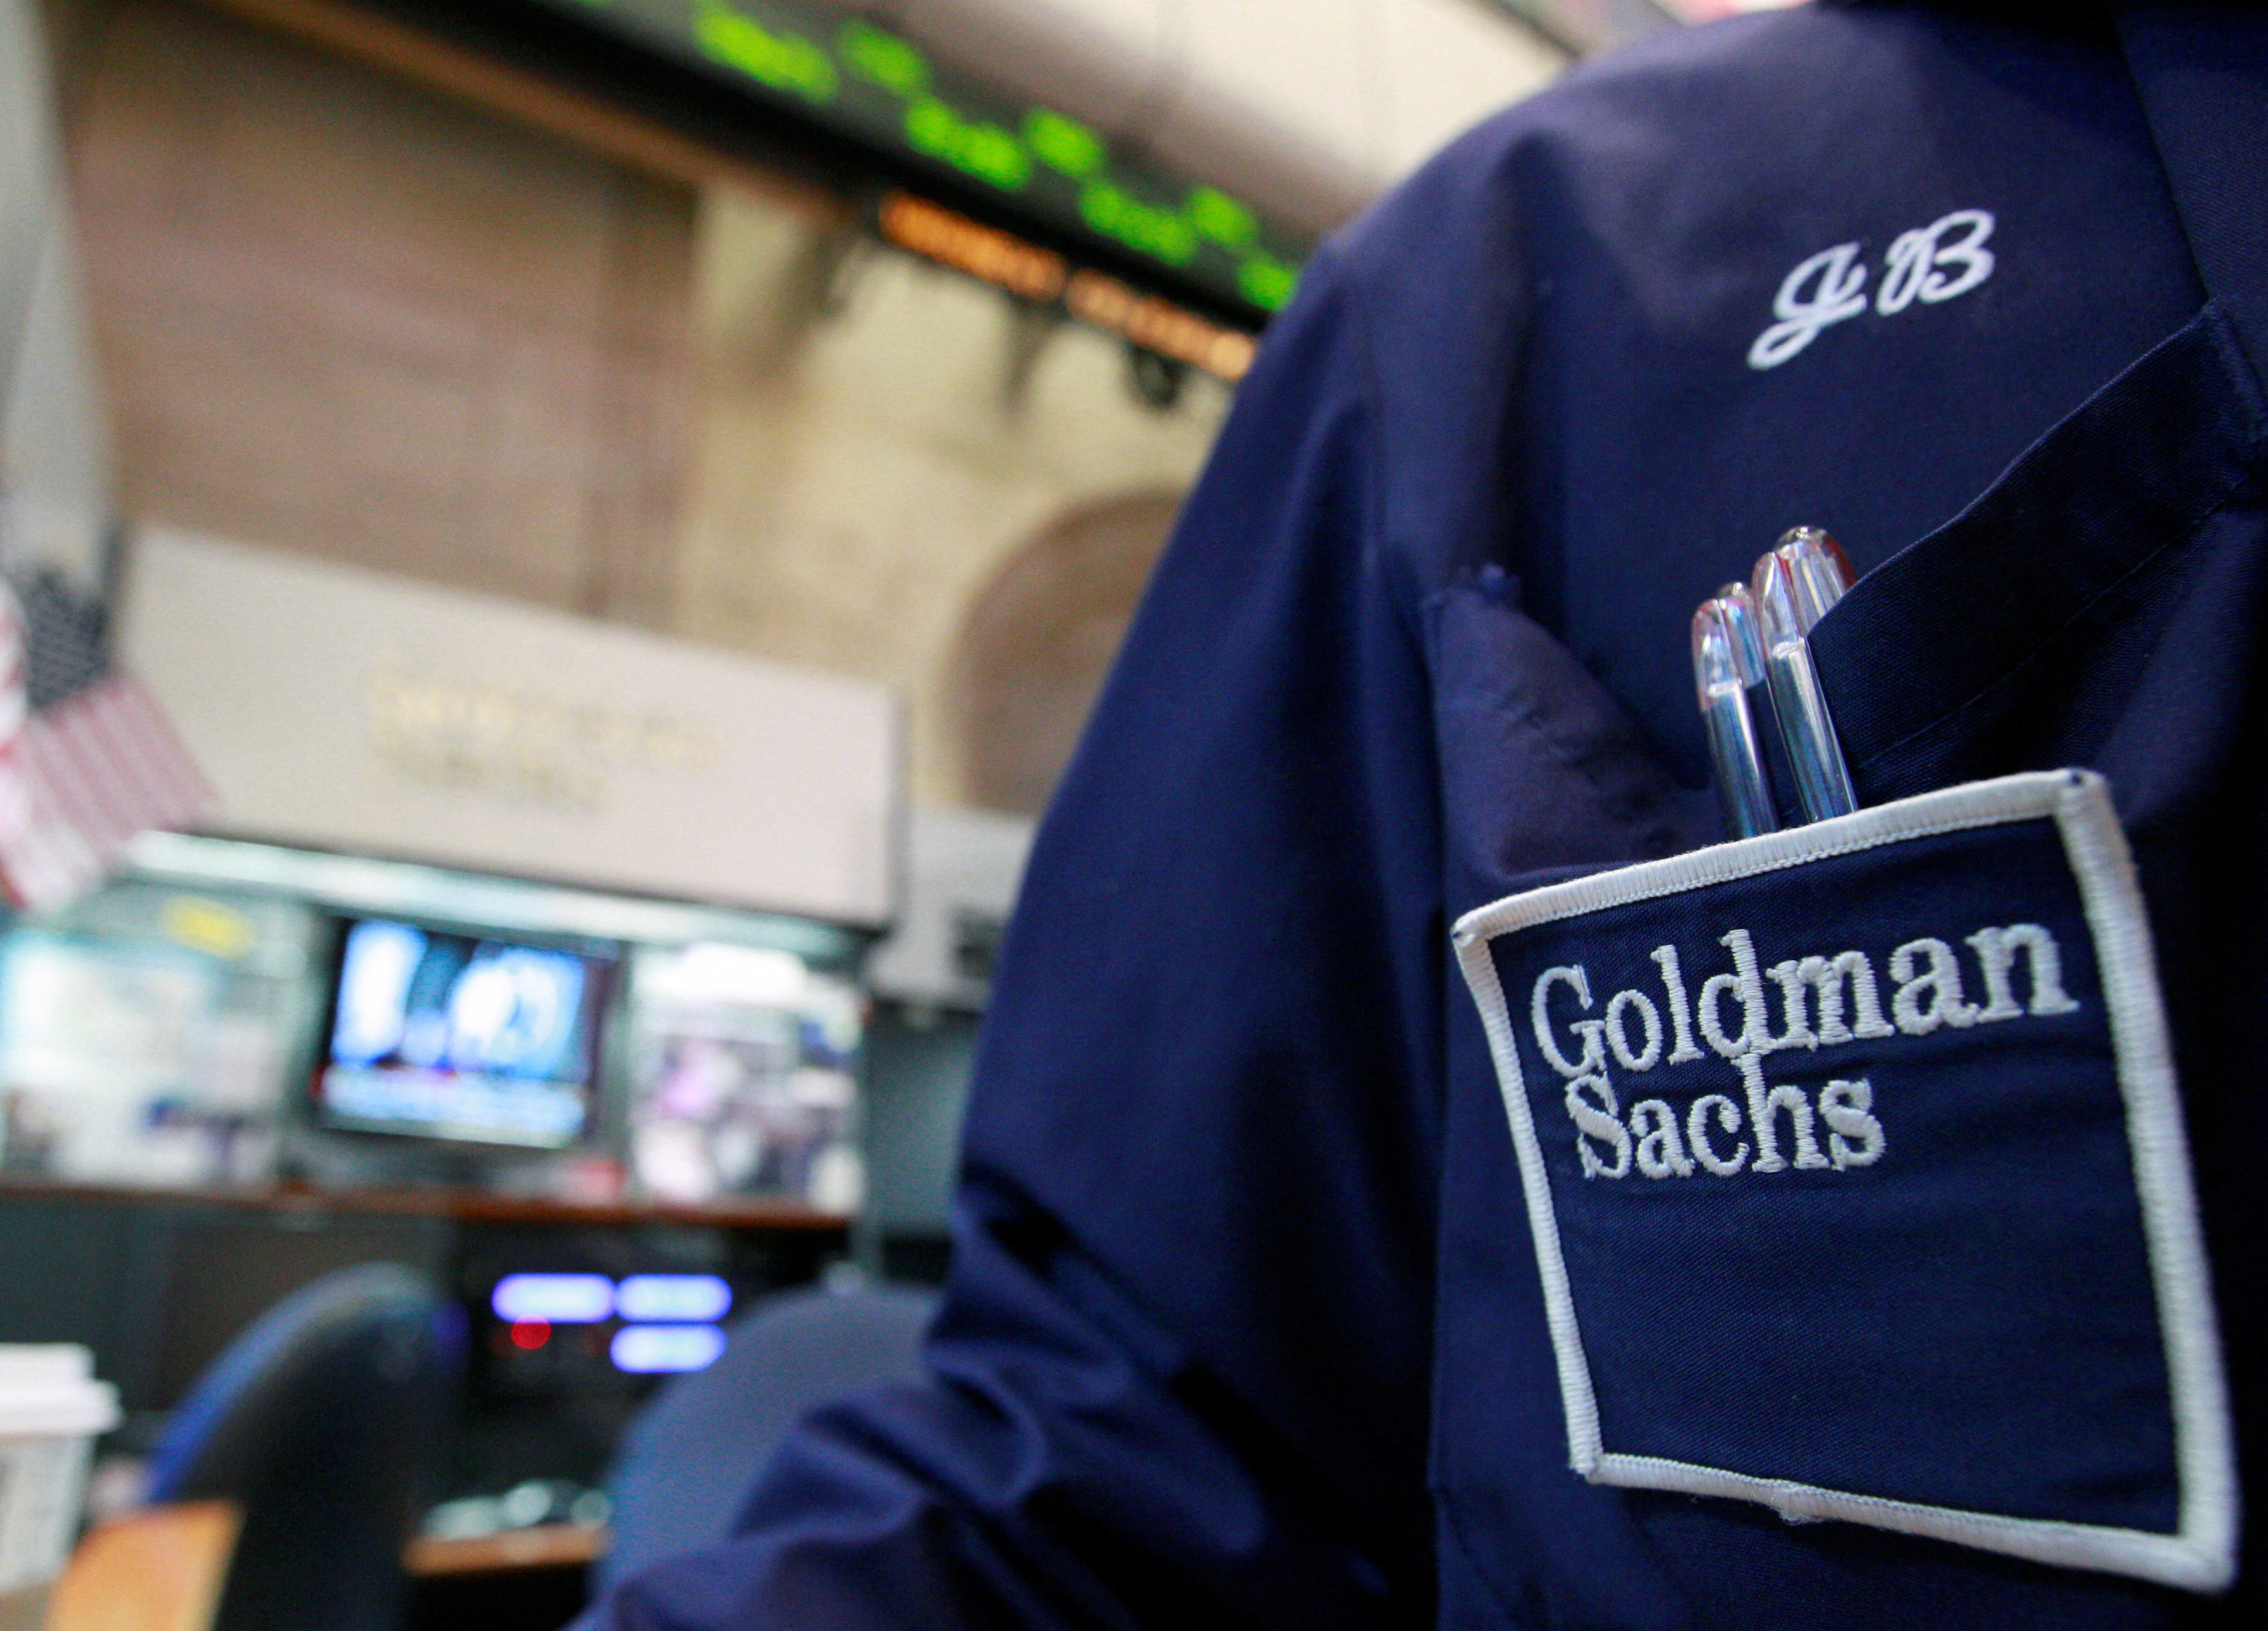 A trader works at a Goldman Sachs booth on the floor of the New York Stock Exchange